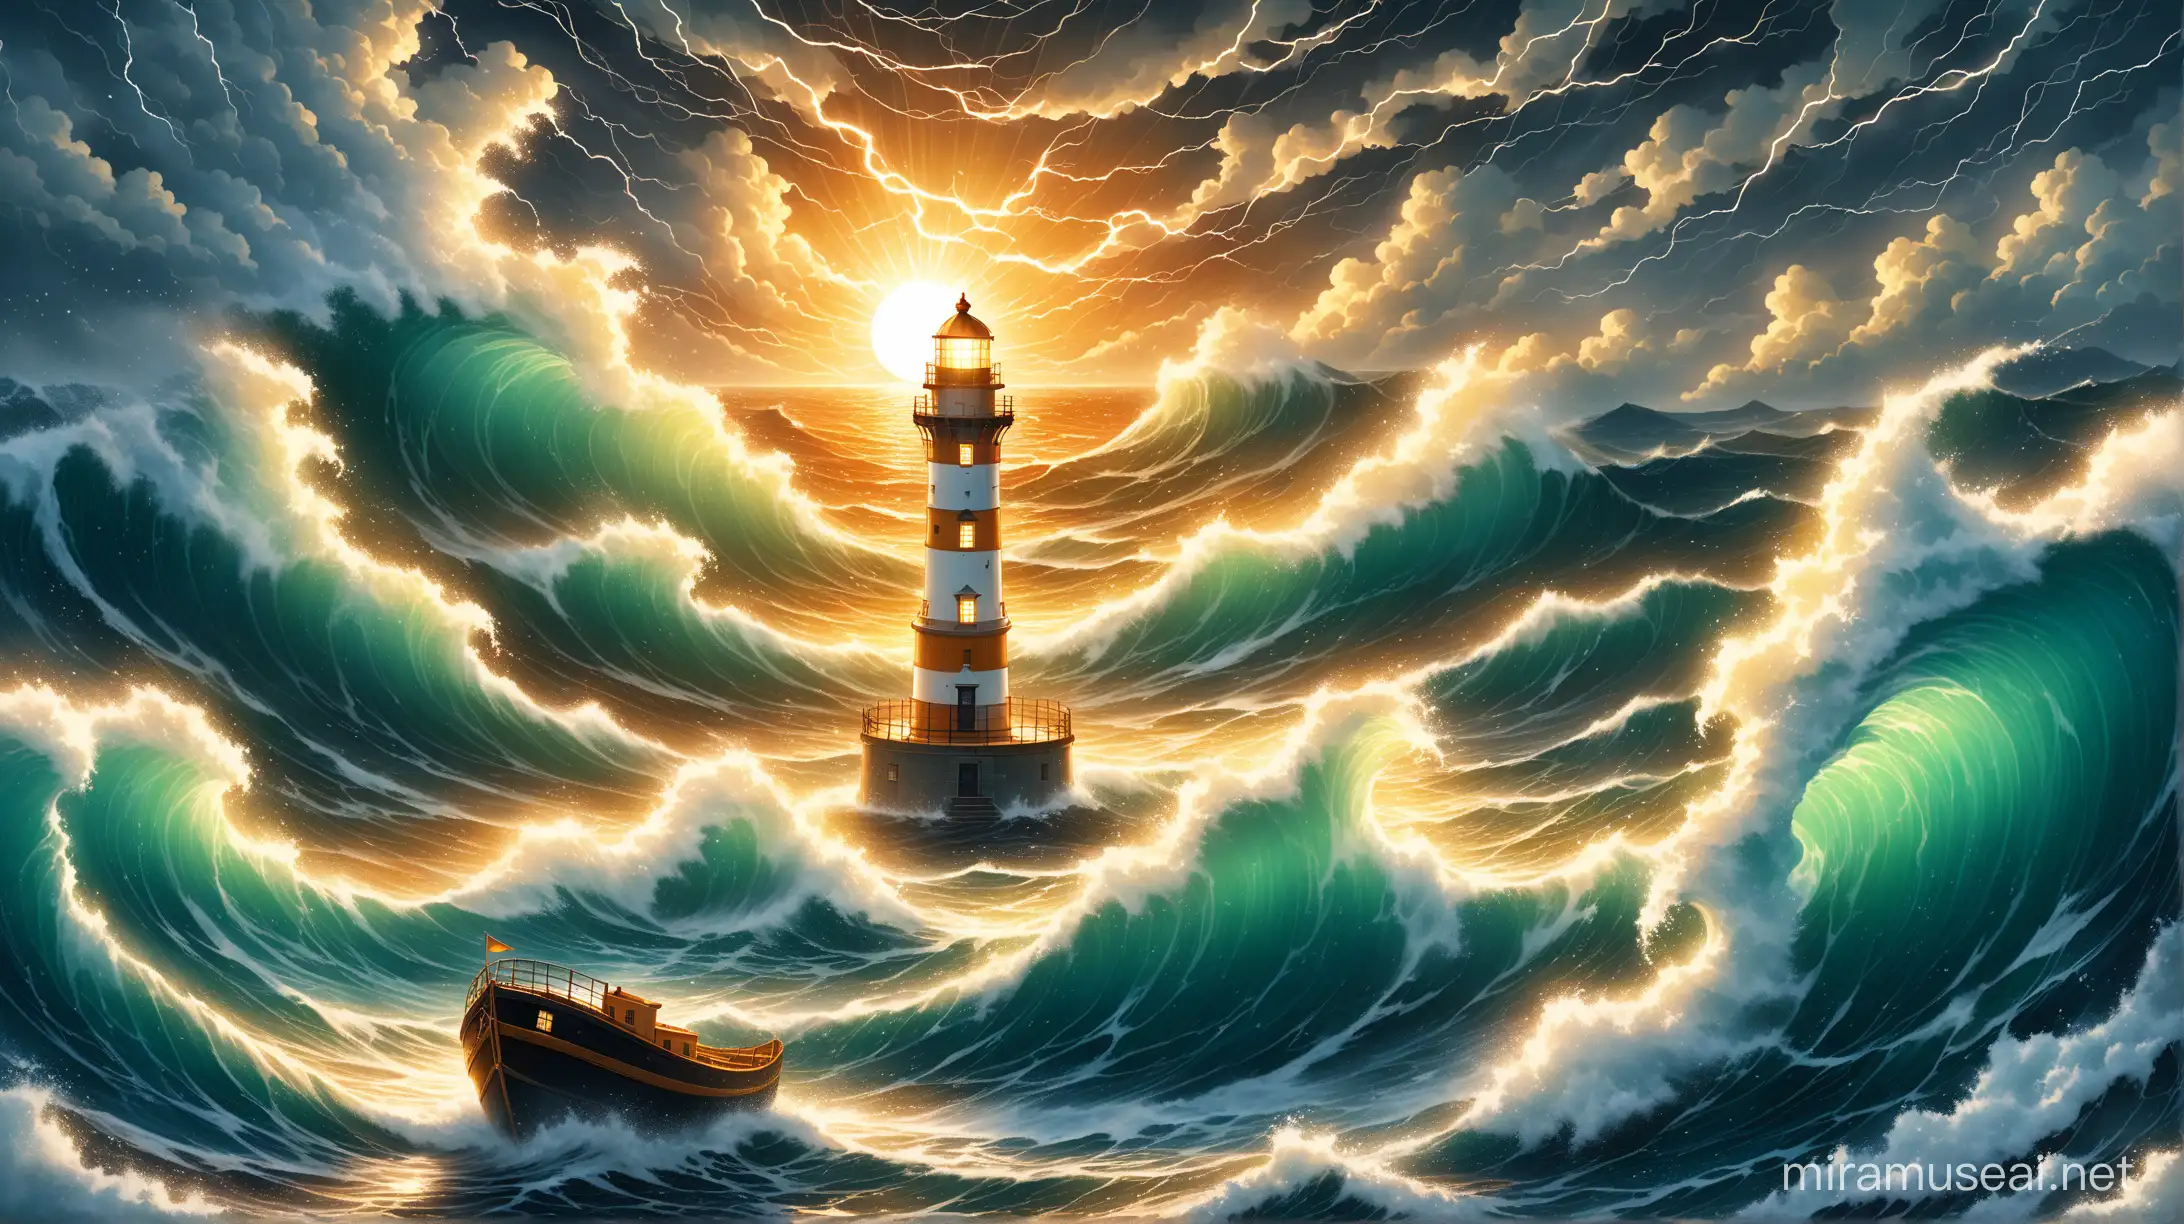 Dramatic Lighthouse Amidst Chaotic Seascape with Tossed Boat